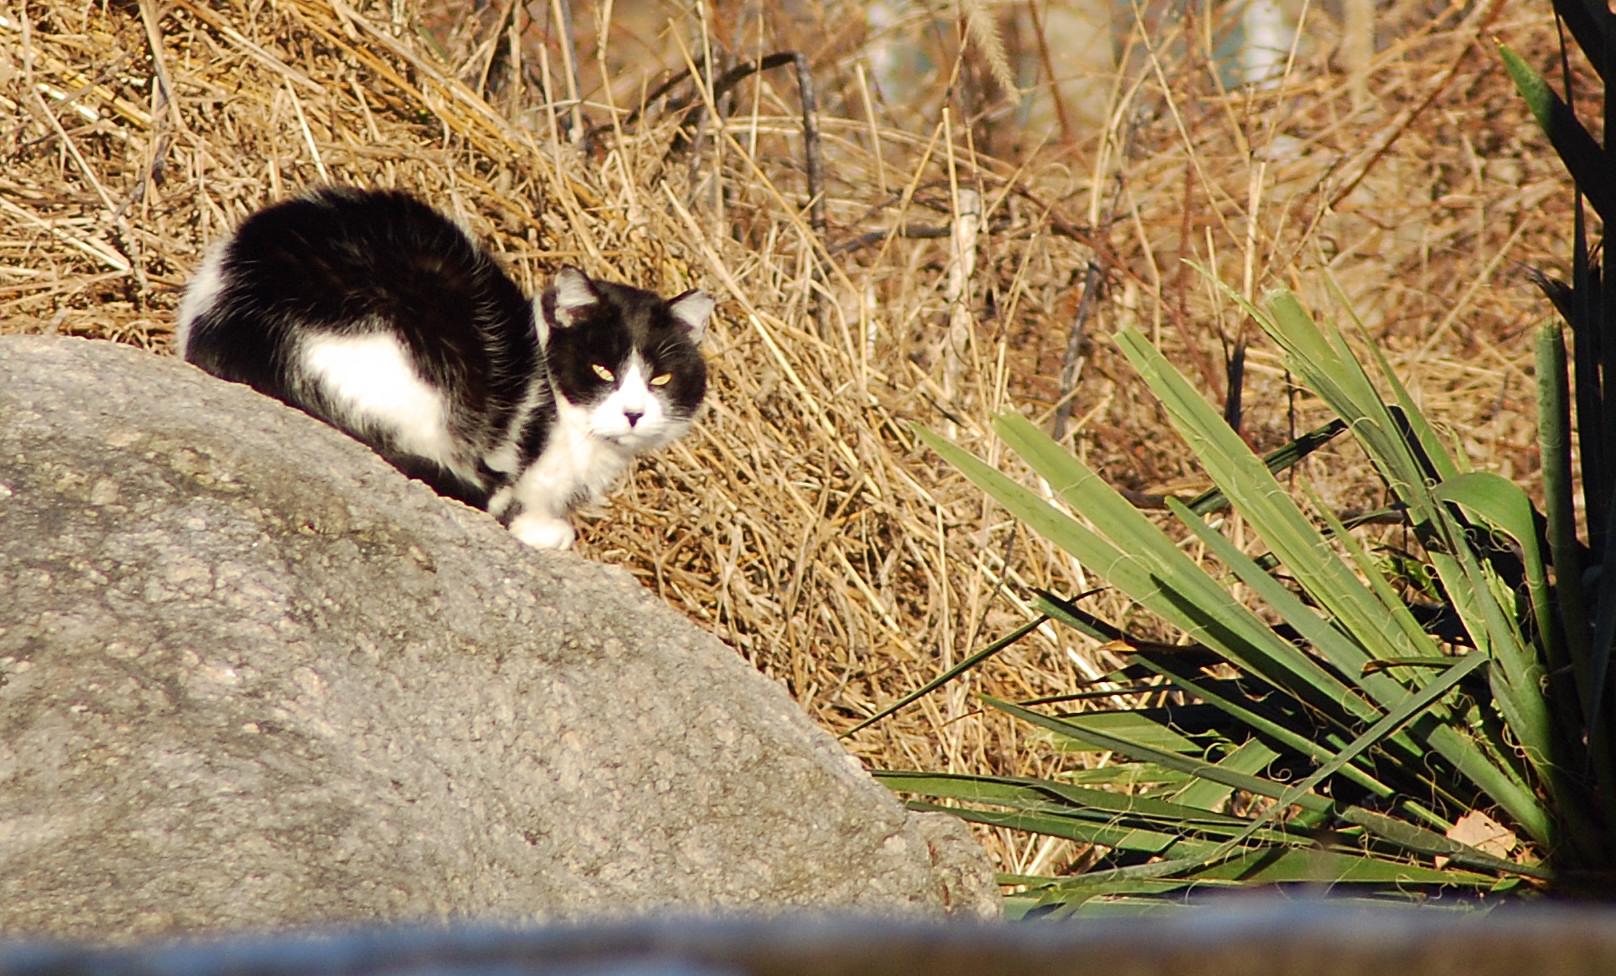 a black and white cat walking on a rock by bushes